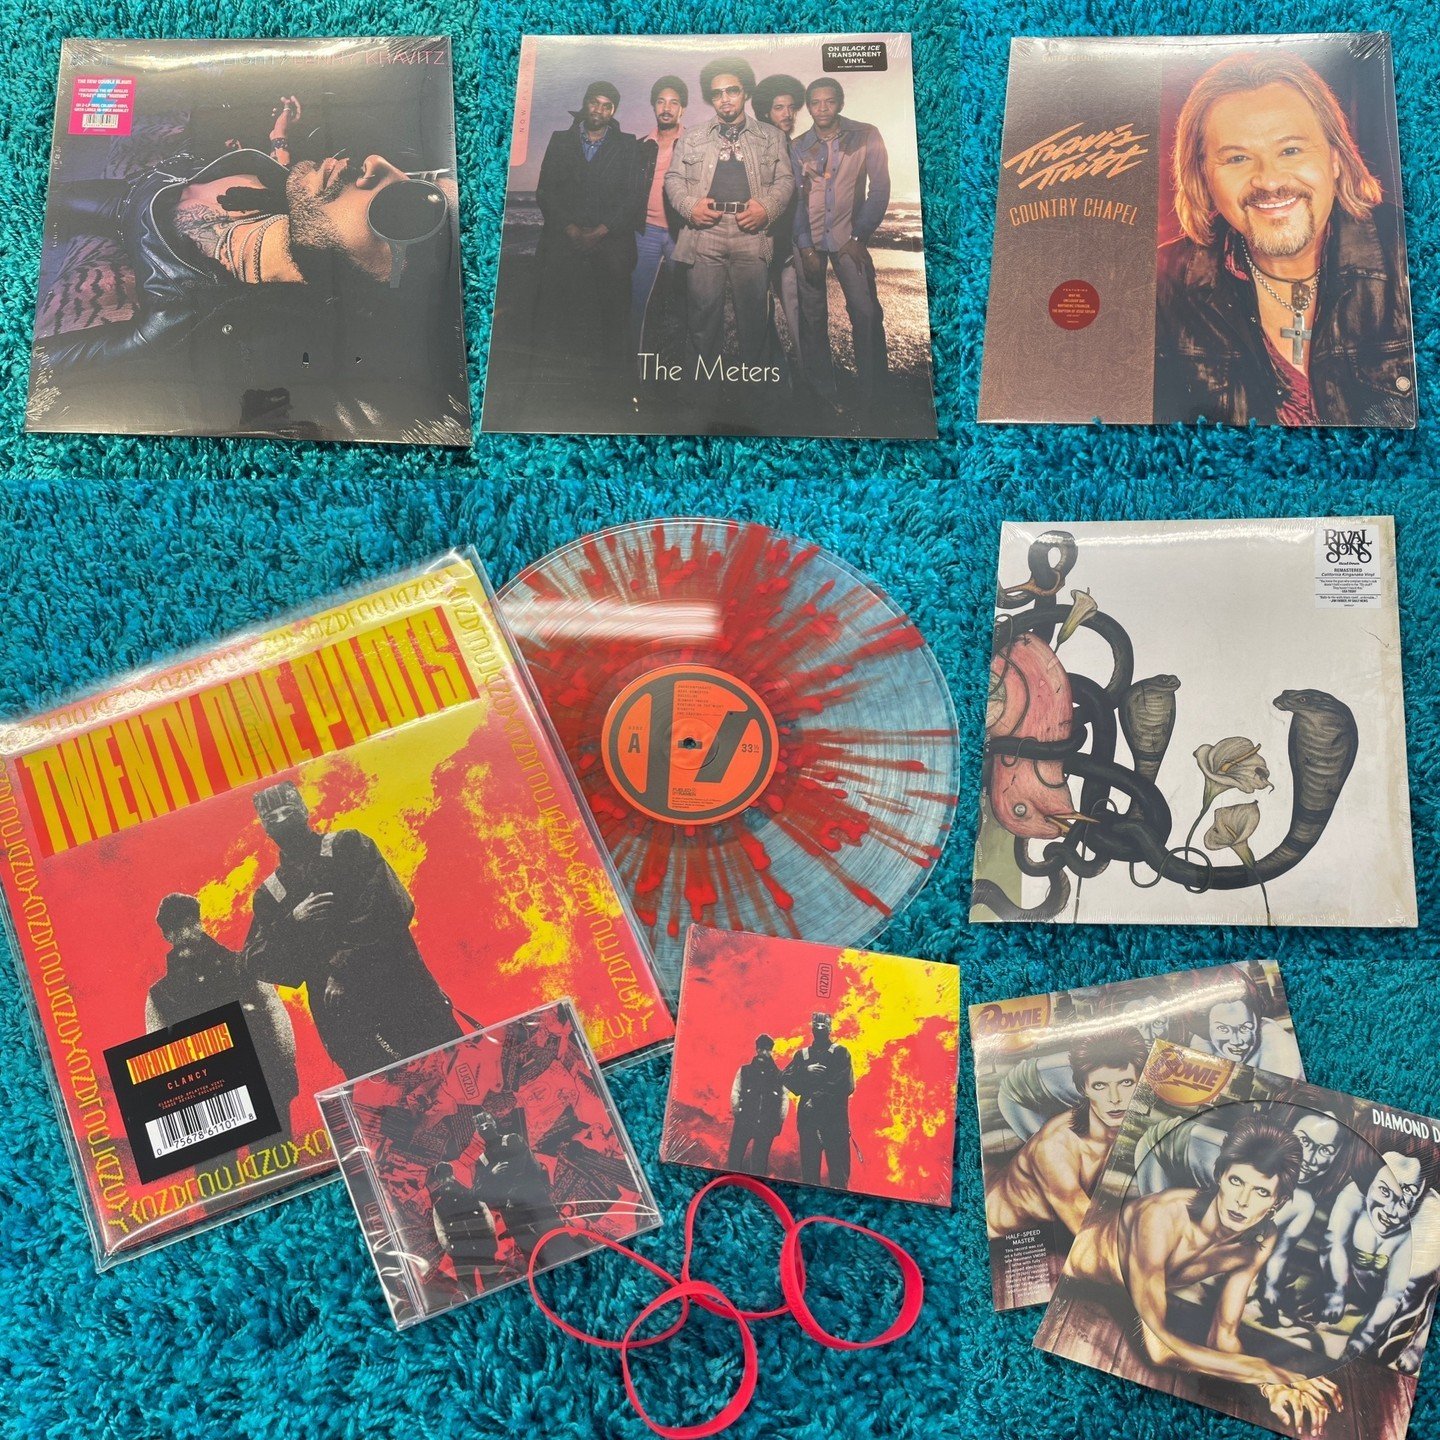 New Releases out Tomorrow, Friday 5/24!  Message us or comment below if you would like us to hold anything for you!
💥 #TwentyOnePilots - Clancy - We have a good amount of the indie exclusive vinyl!  All vinyl copies come with an exclusive bonus prin